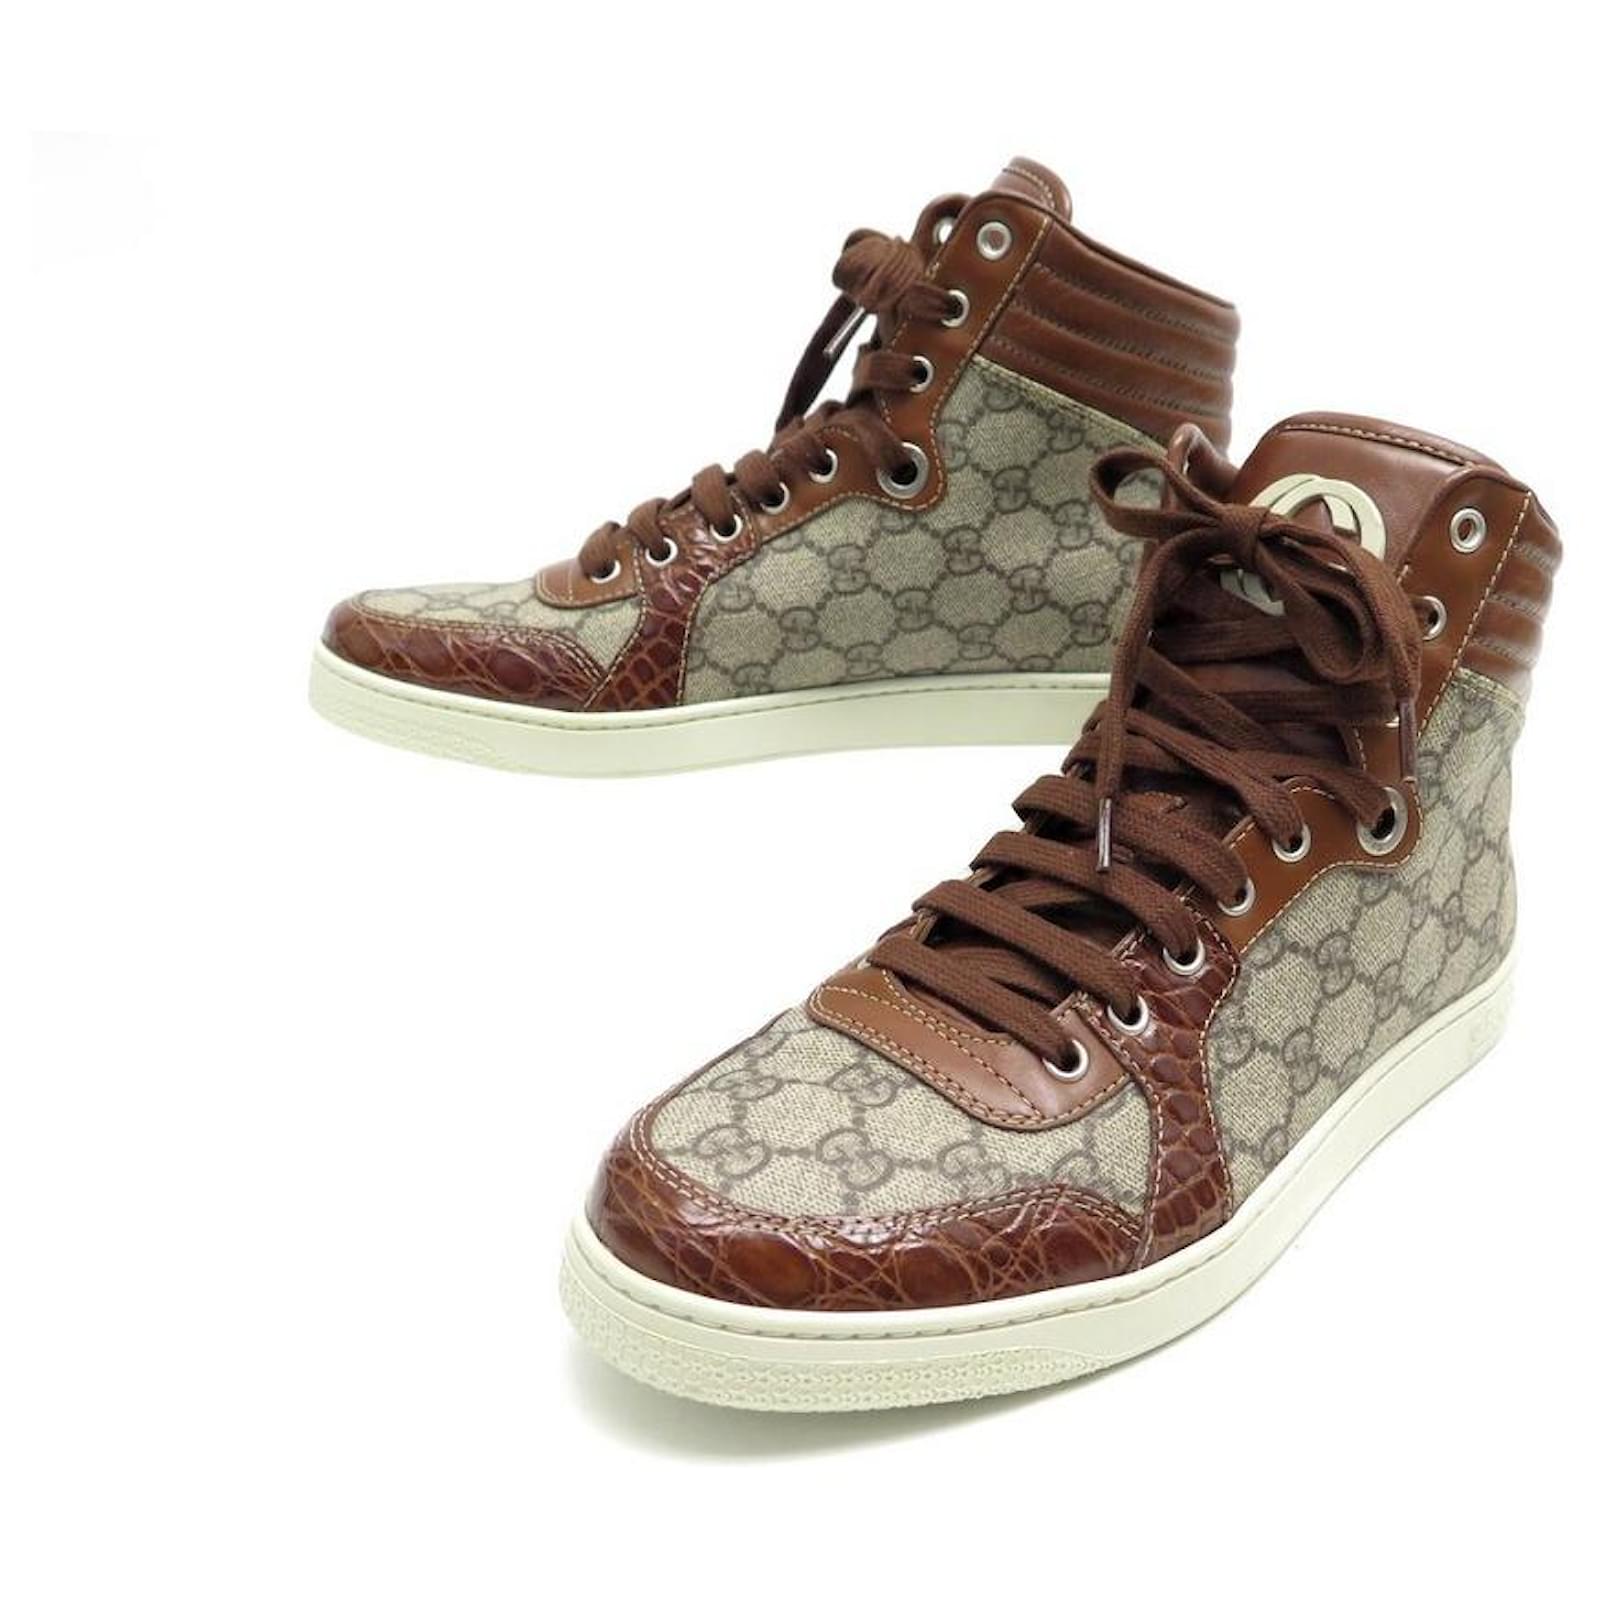 NEW GUCCI BASKETS CODA HIGH TOP GUCCISSIMA CANVAS SHOES   SHOES  Brown Leather  - Joli Closet